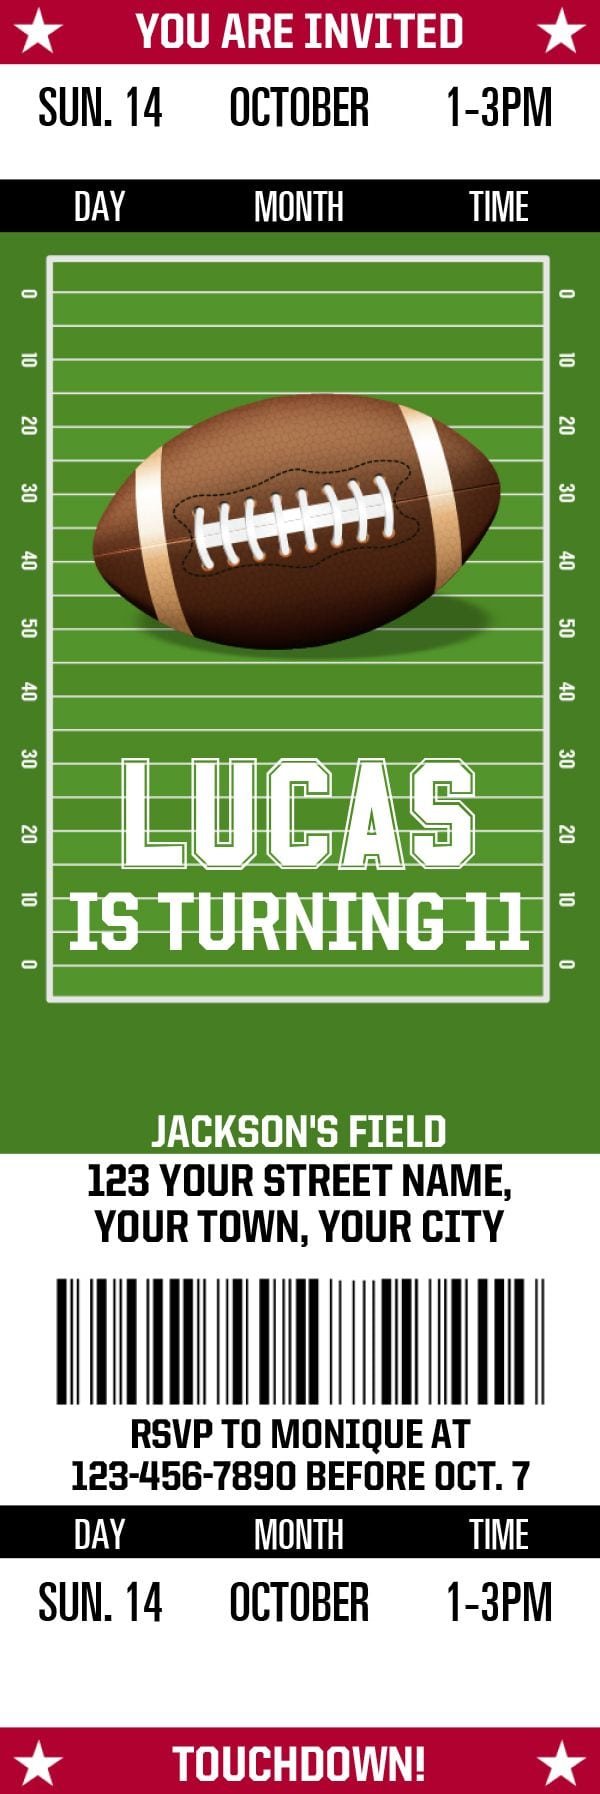 17 Best Ideas About Football Party Invitations On Pinterest